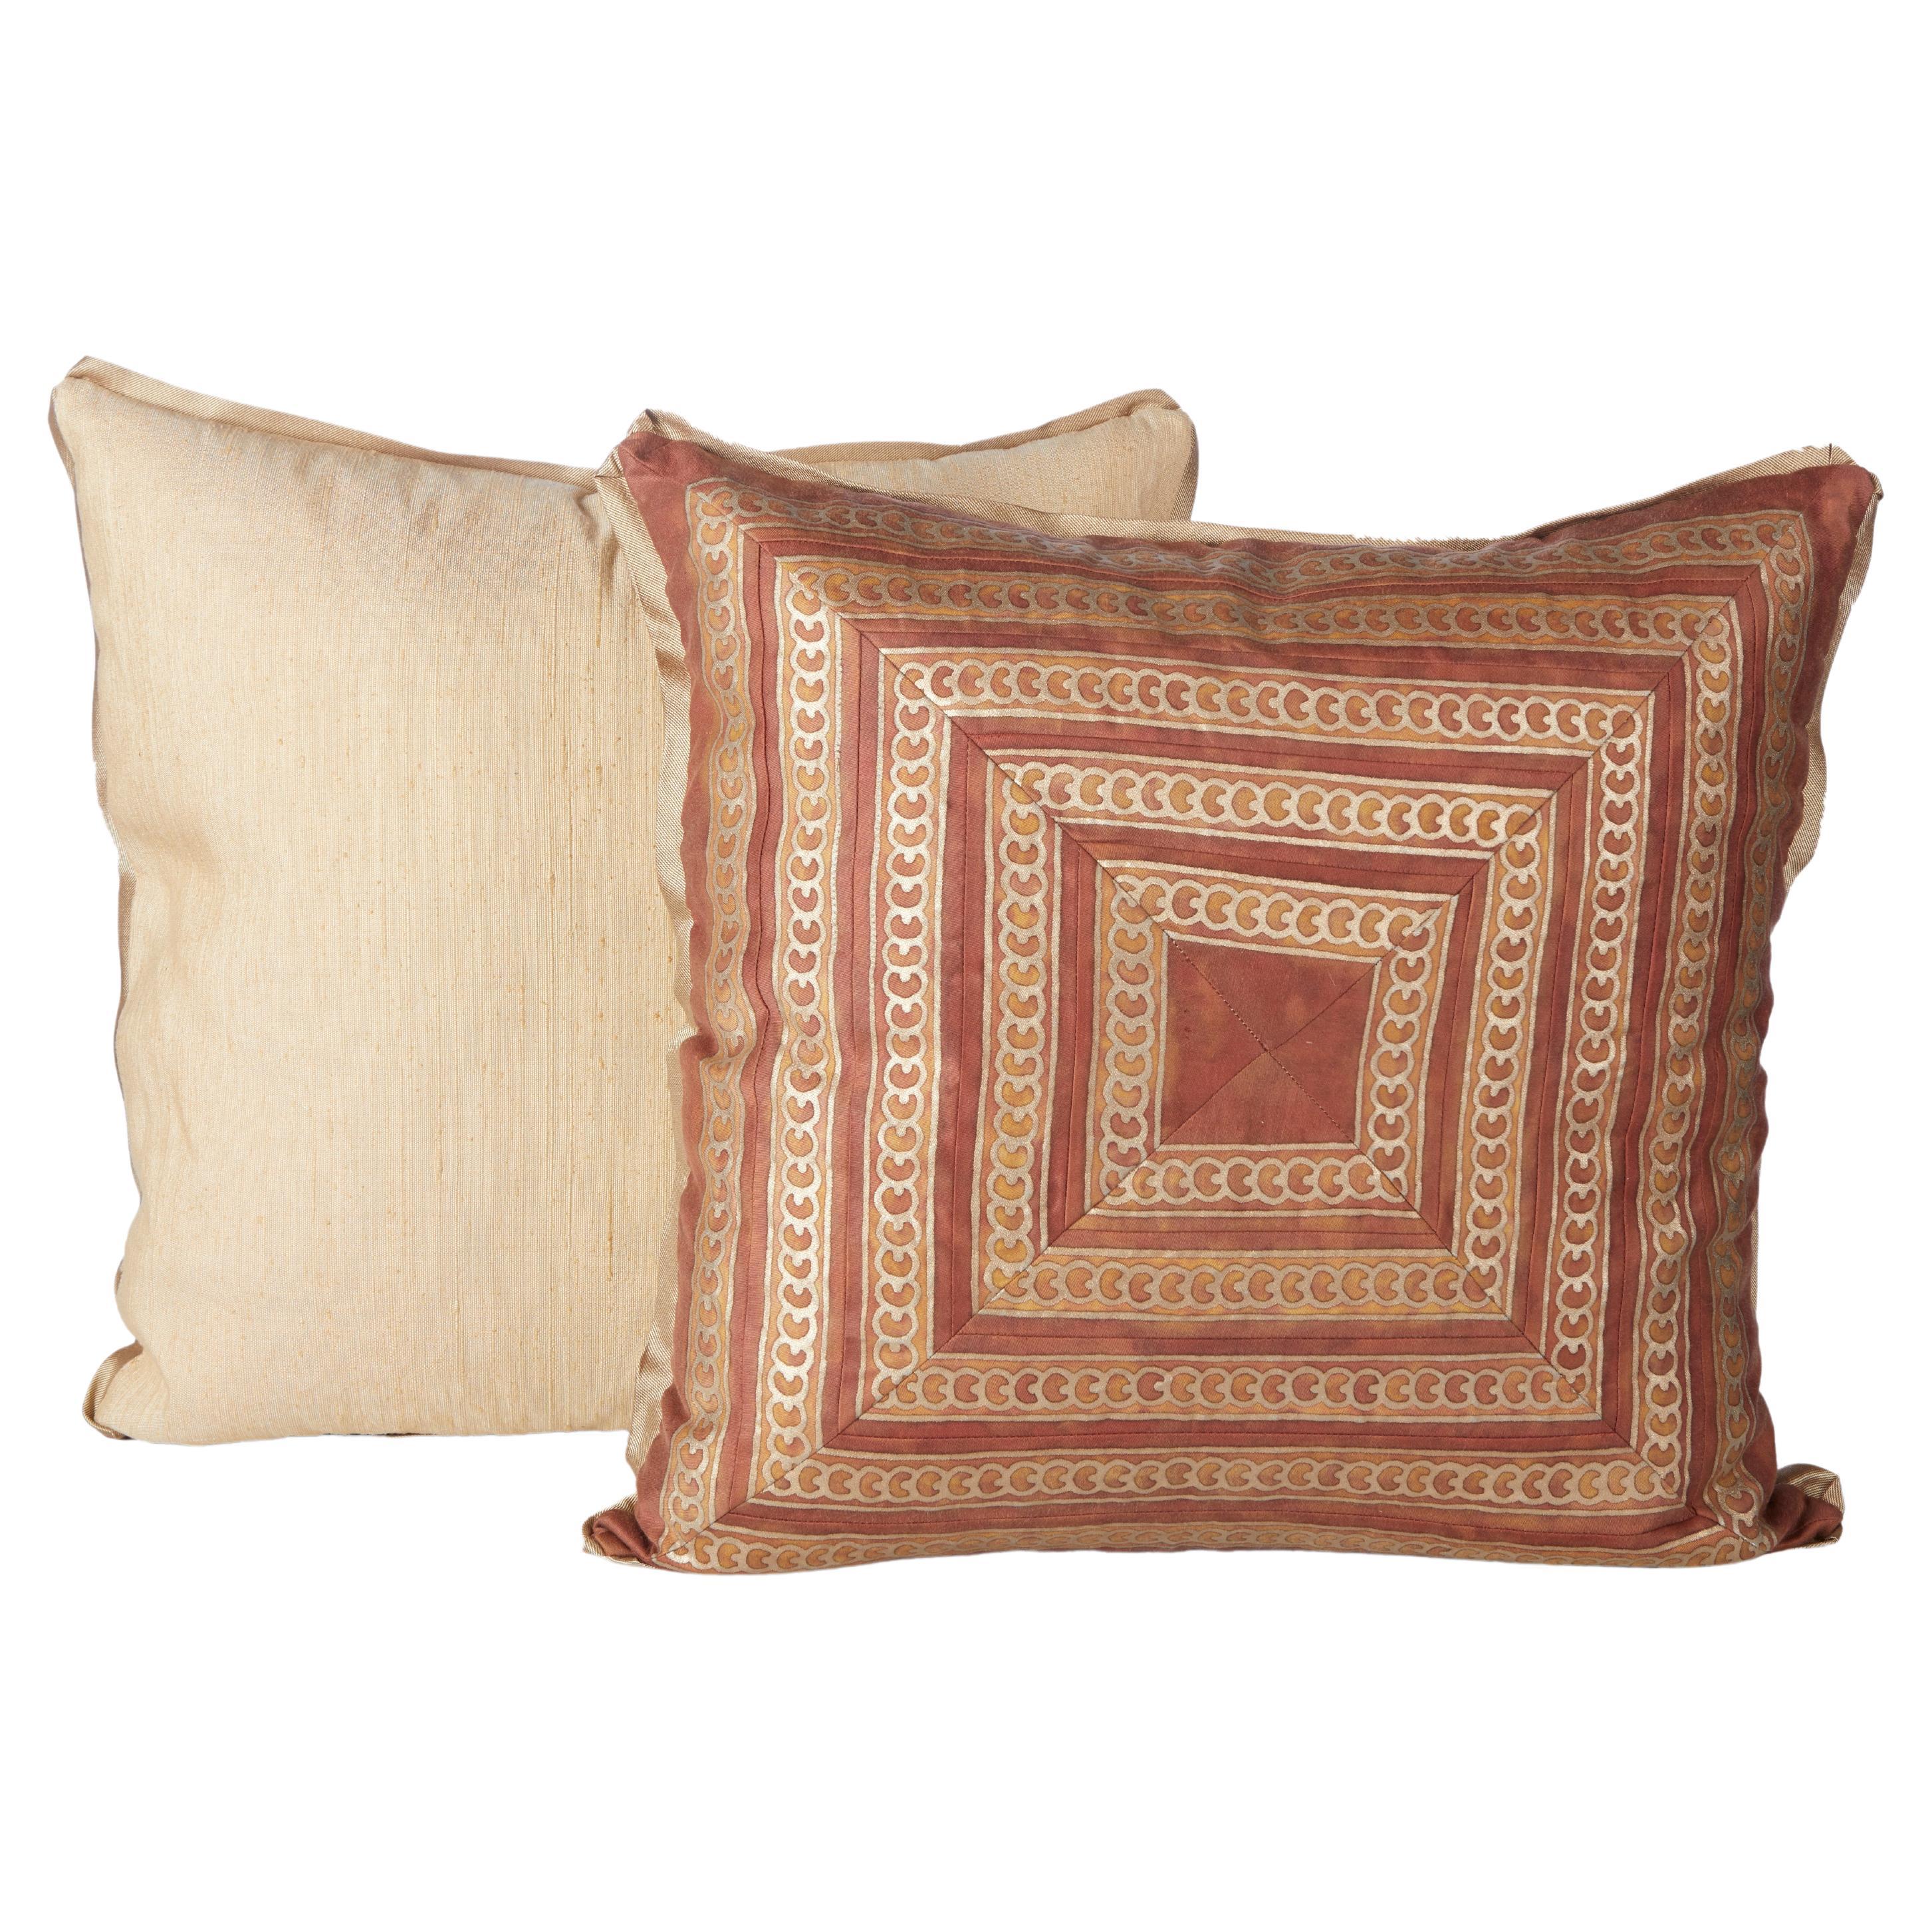 Pair of Fortuny Cushions with Border Pieced and Mitered by David Duncan Studio For Sale